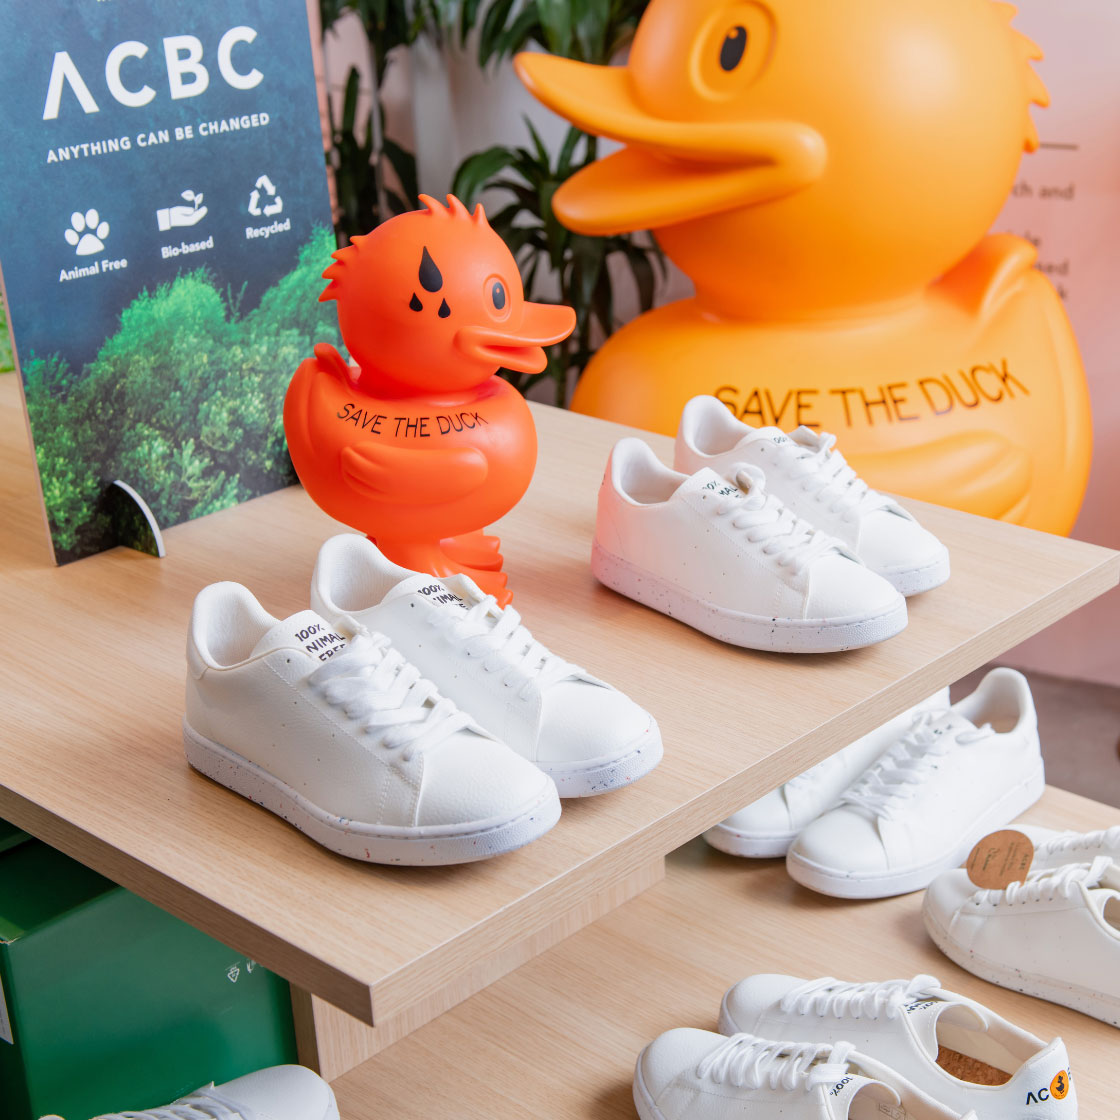 ACBC sustainable shoes sat on a shelf next to a rubber duck